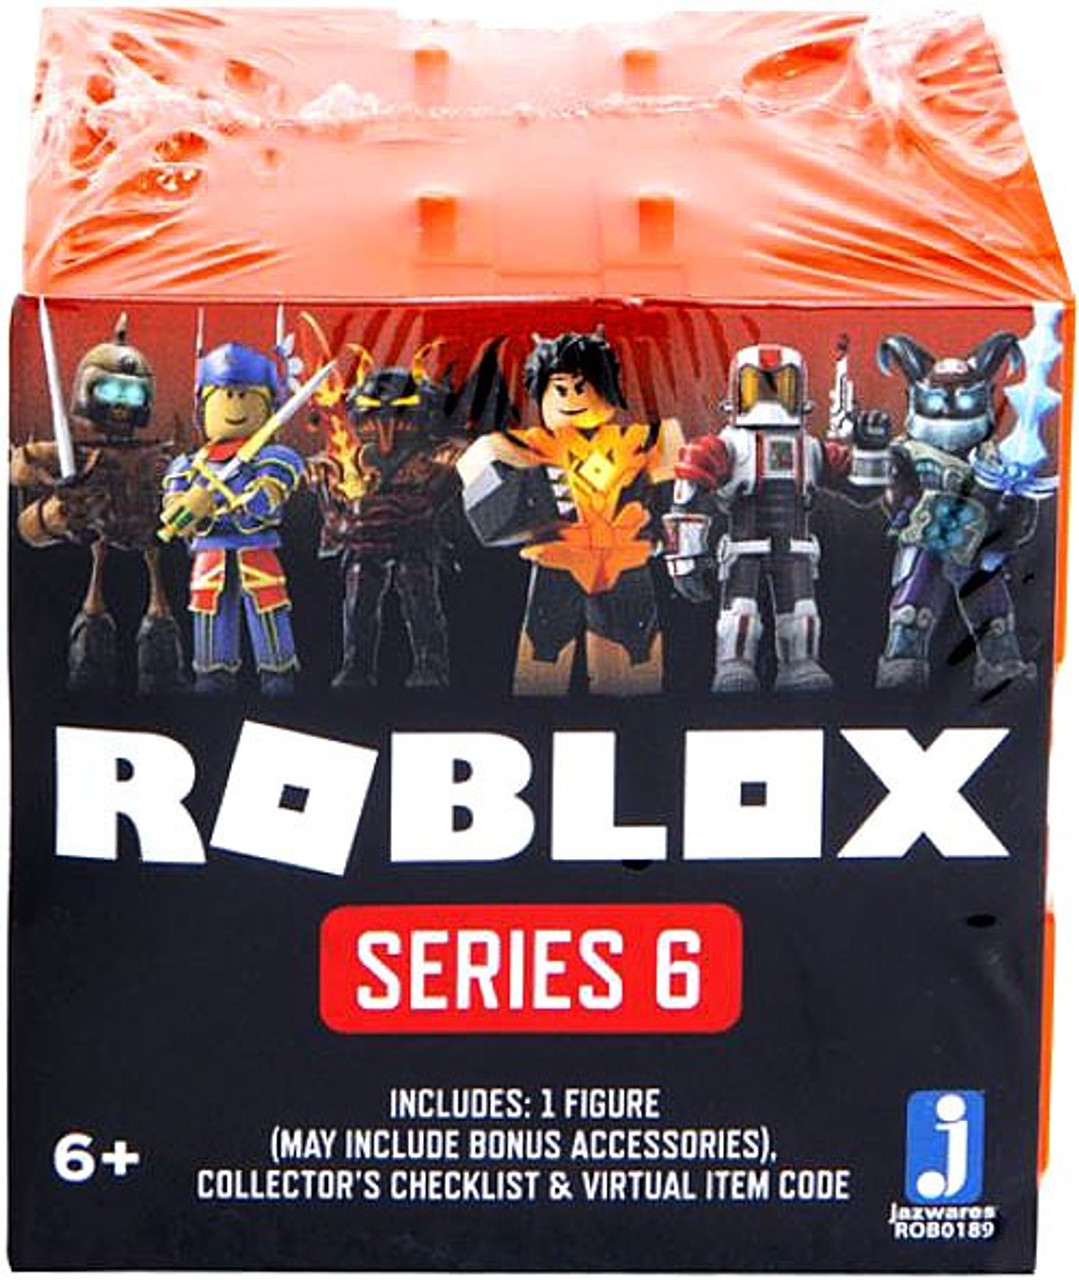 Roblox Series 5 Yellow Gold Blind Box Toys Figures 1 2 3 4 Exclusive Game Codes Tv Movie Video Games Toys Hobbies Plazastore Se - international collectible series roblox